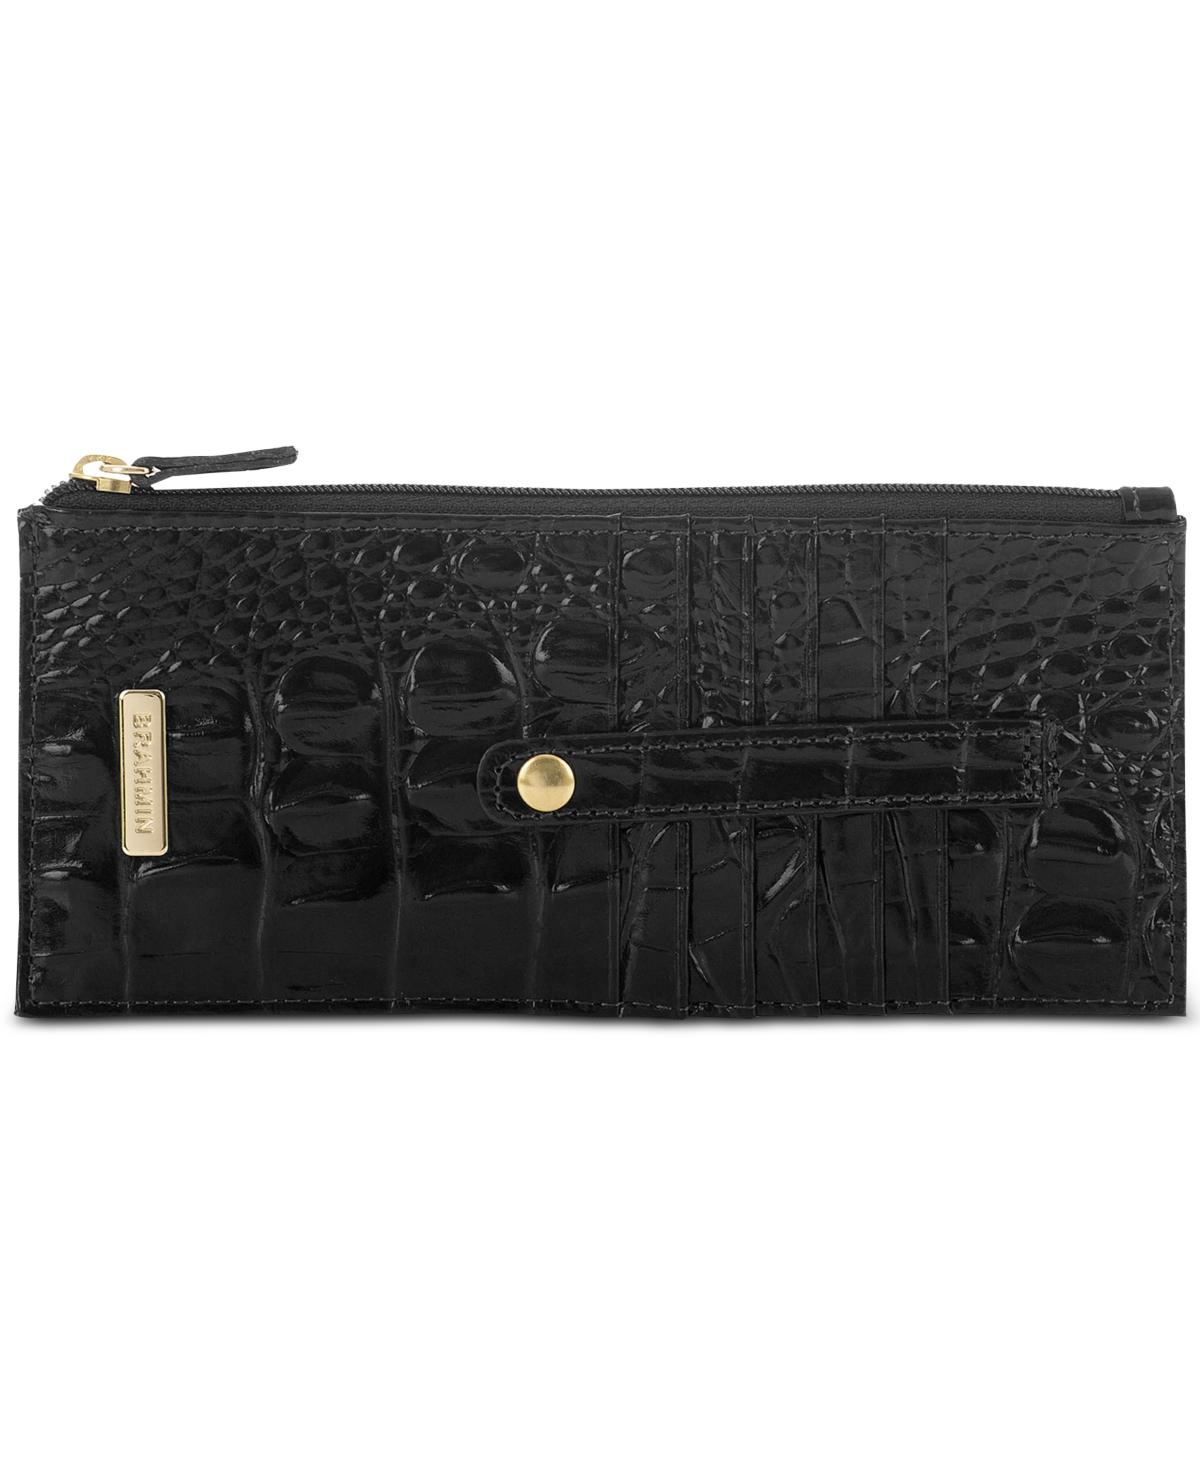 Credit Card Melbourne Embossed Leather Wallet - Buttercup